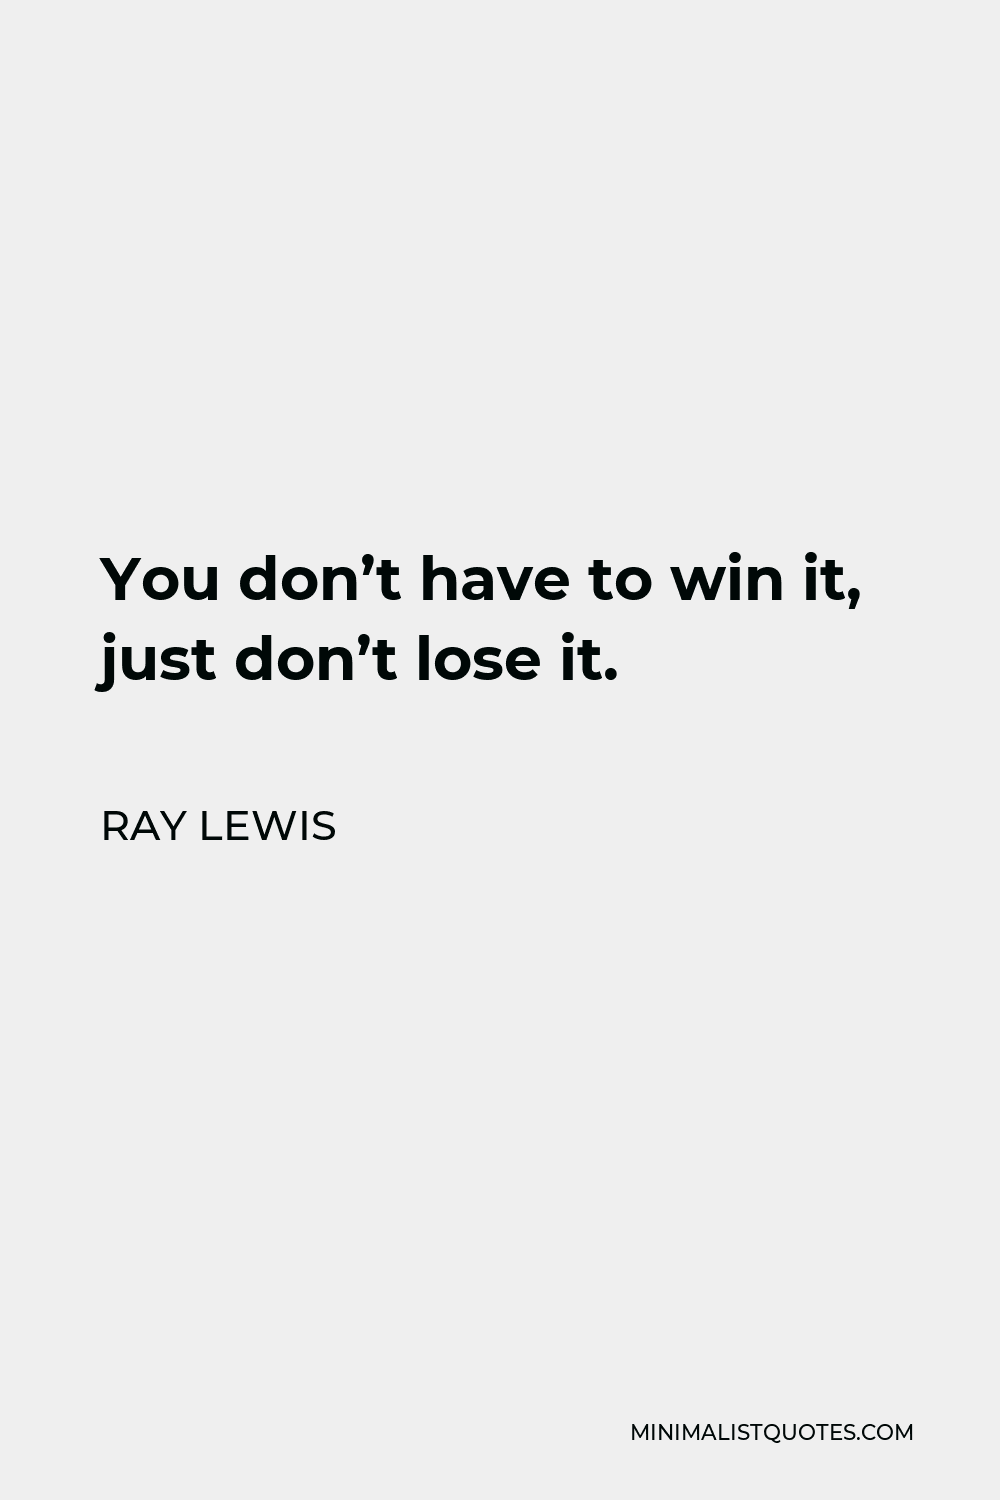 Ray Lewis Quote - You don’t have to win it, just don’t lose it.